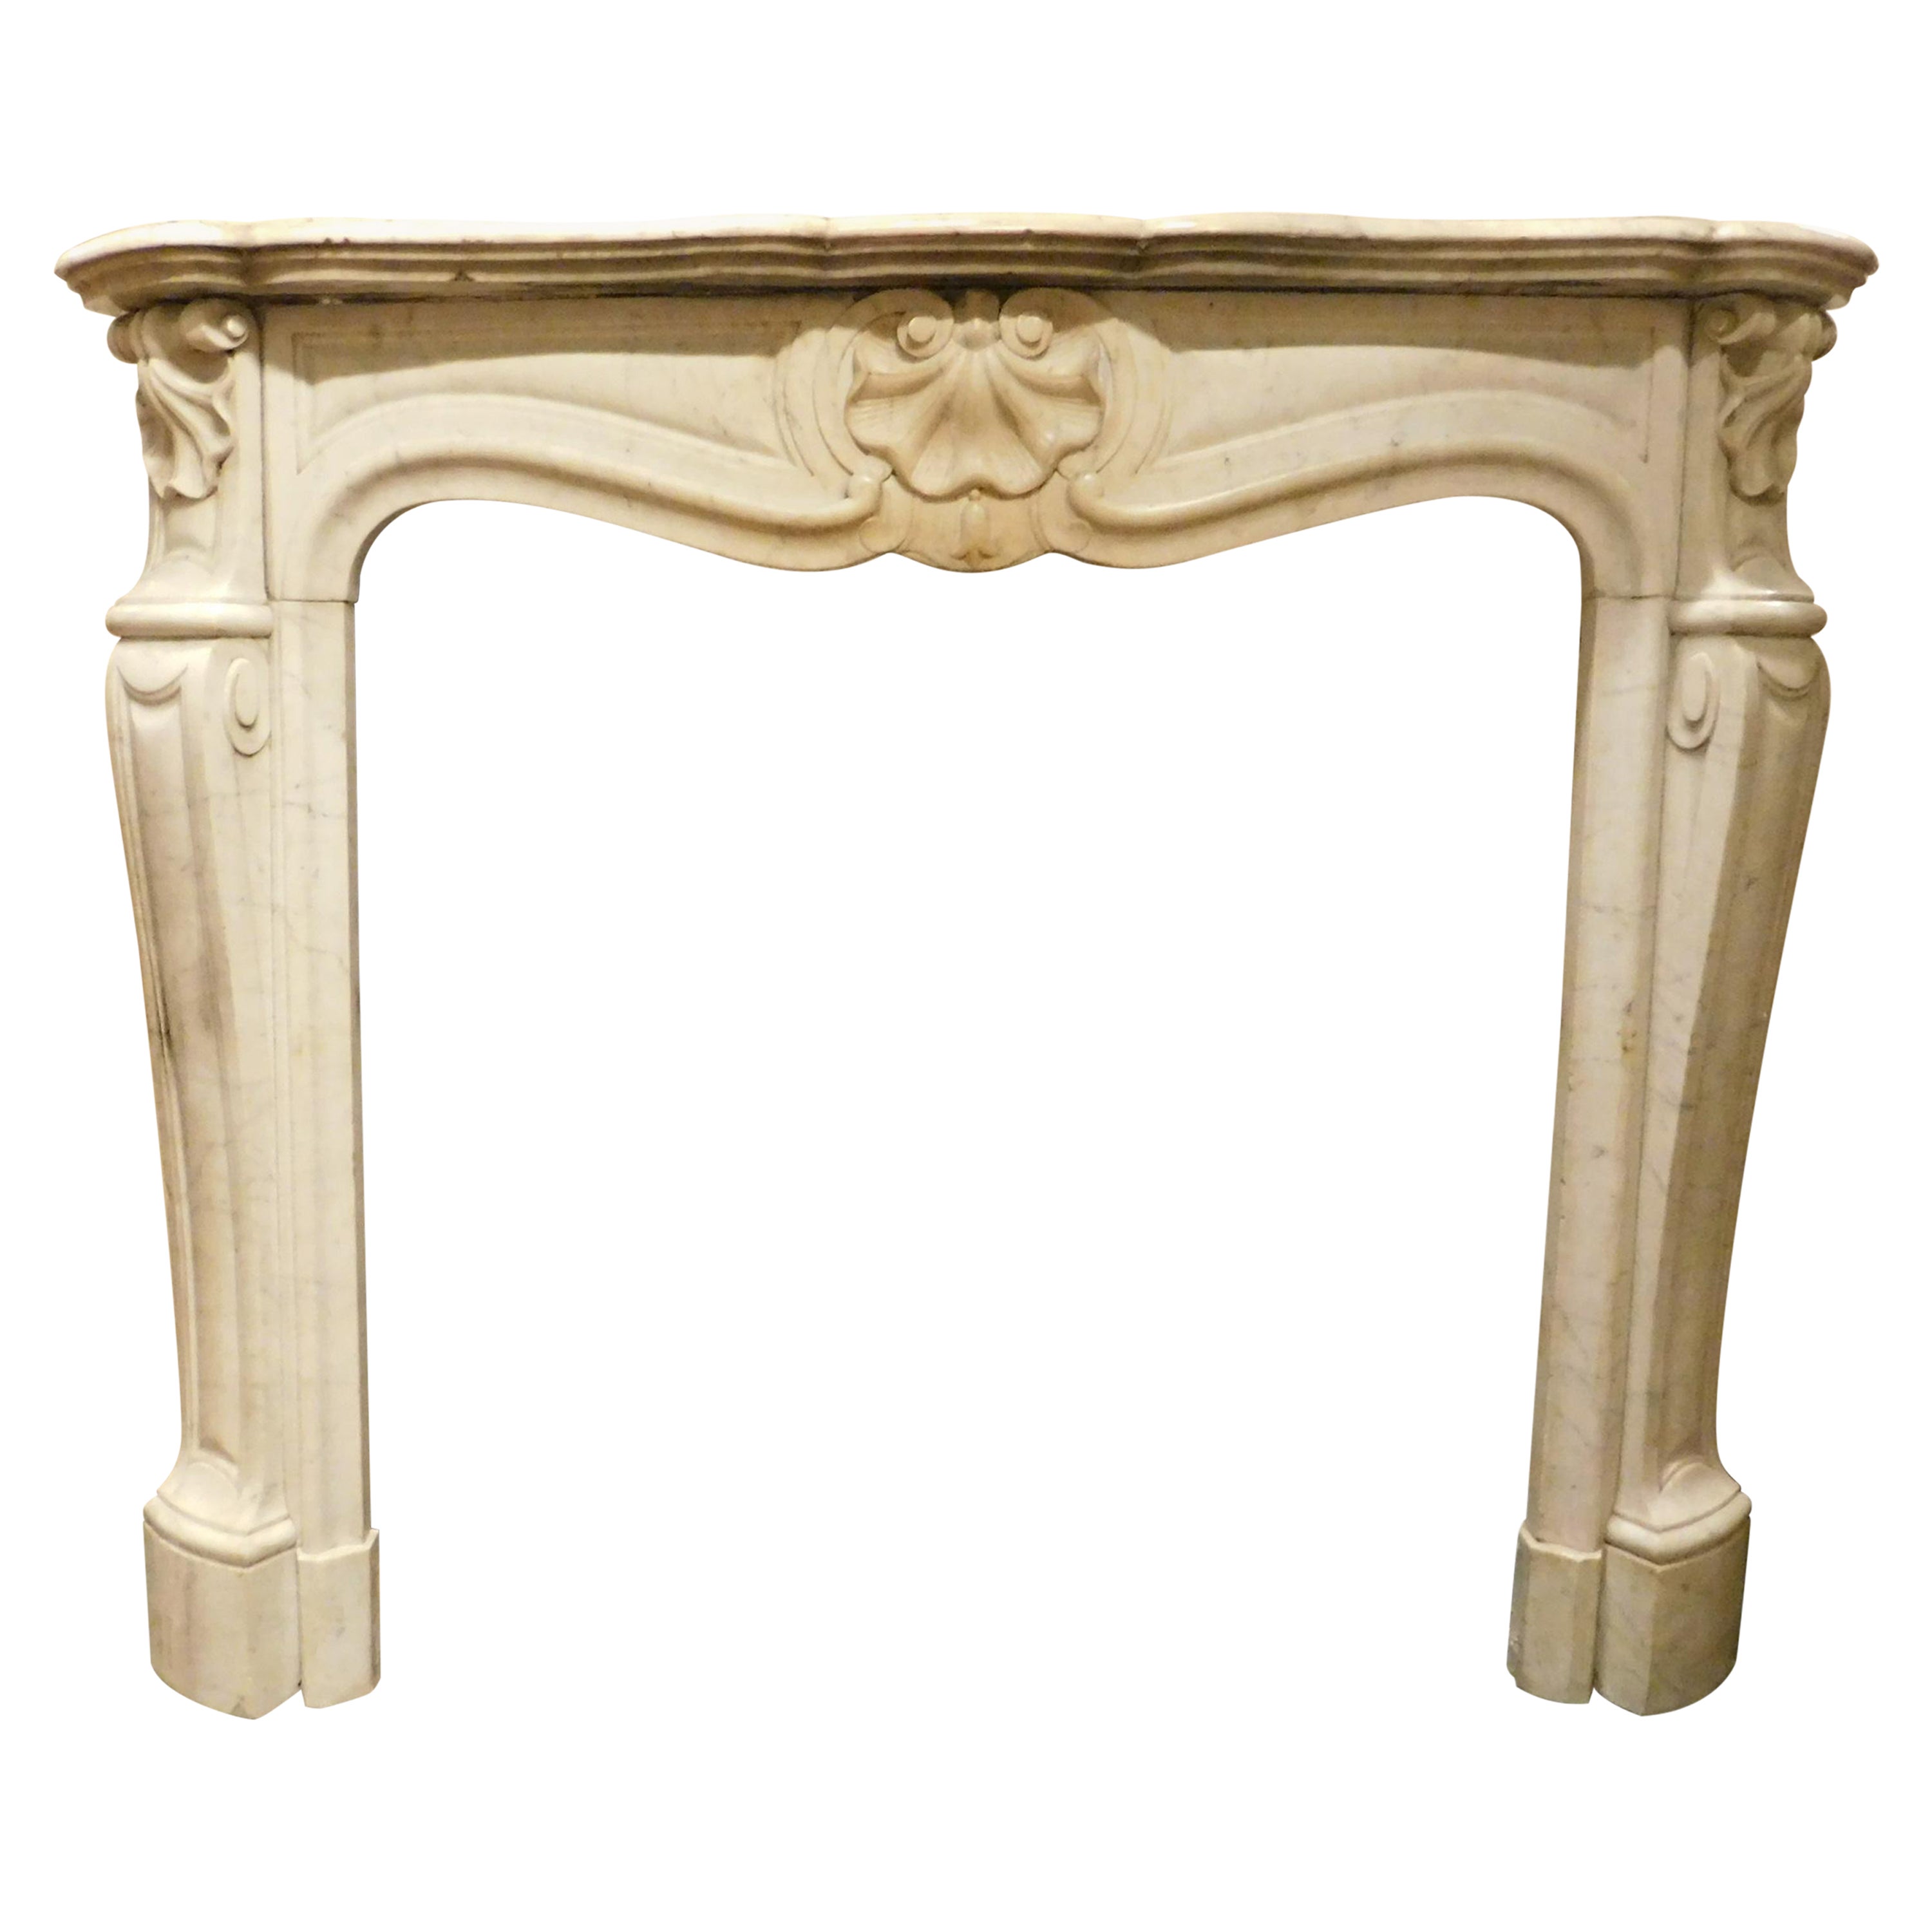 Antique Fireplace in White Carrara Marble with Three Shells, 18th Century France